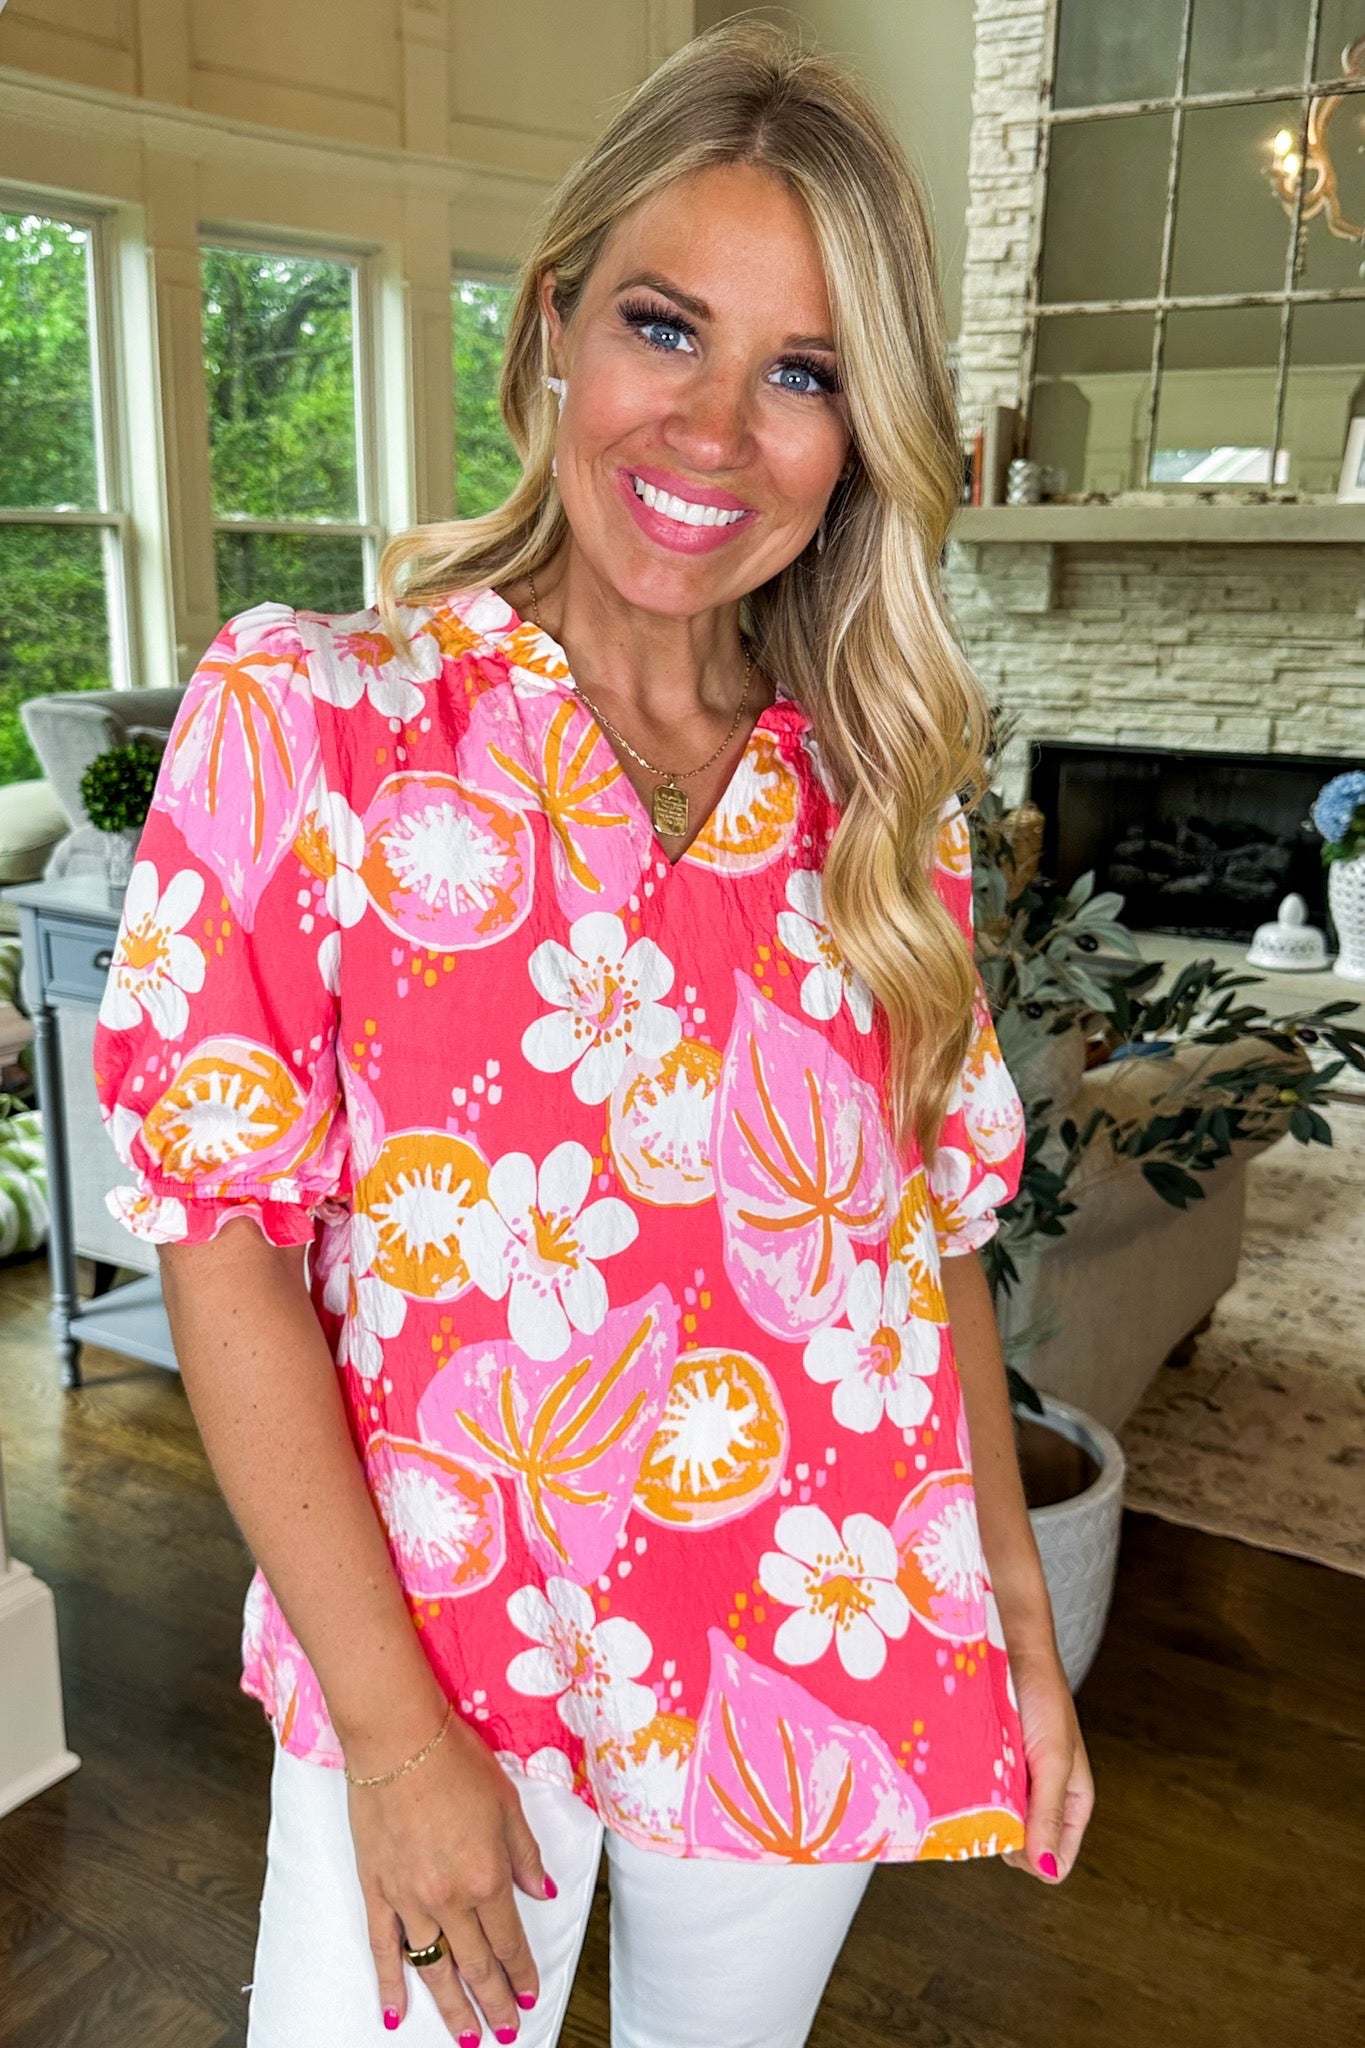 The Malia Kiwi Bloom Coral Top by Michelle McDowell